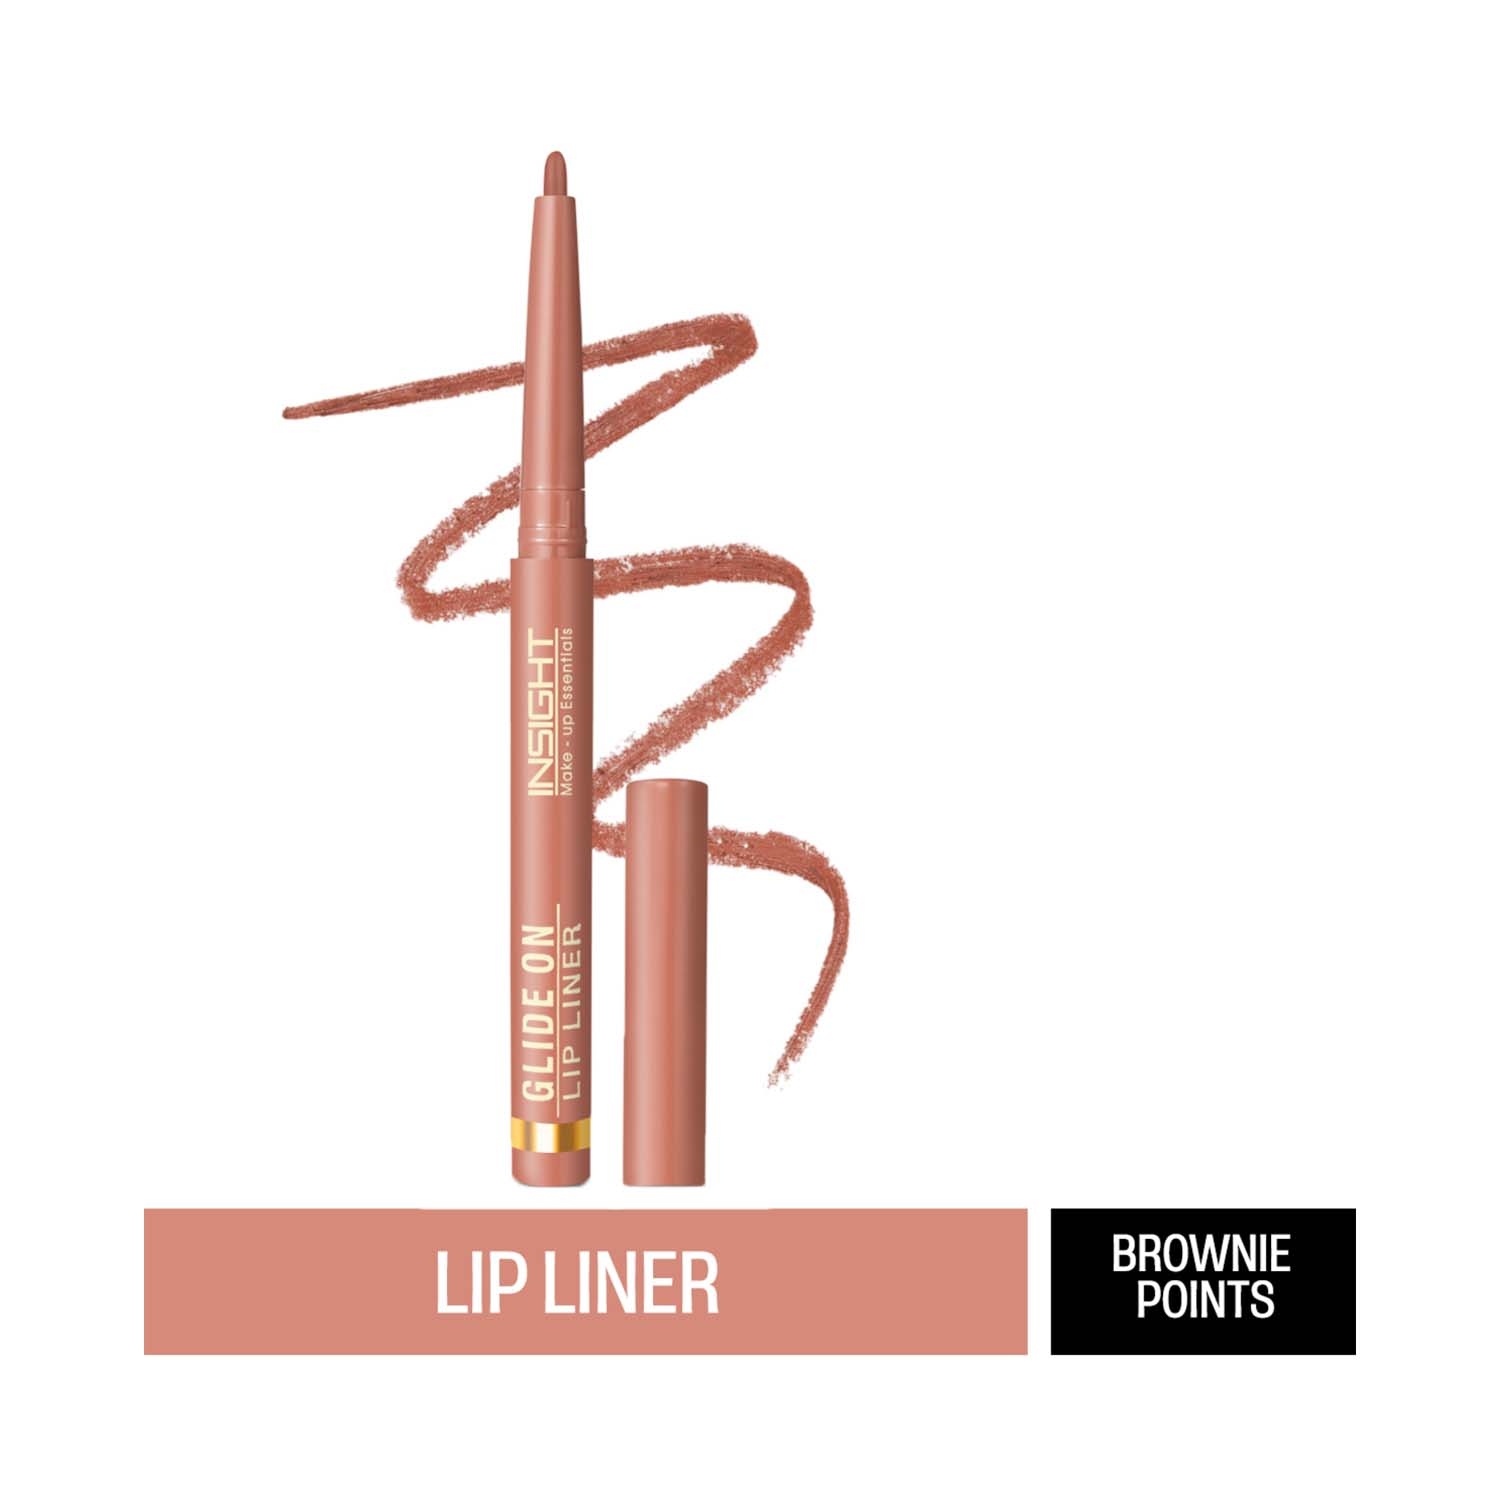 Insight Cosmetics | Insight Cosmetics Glide On Lip Liner - Brownie Points (0.3g)